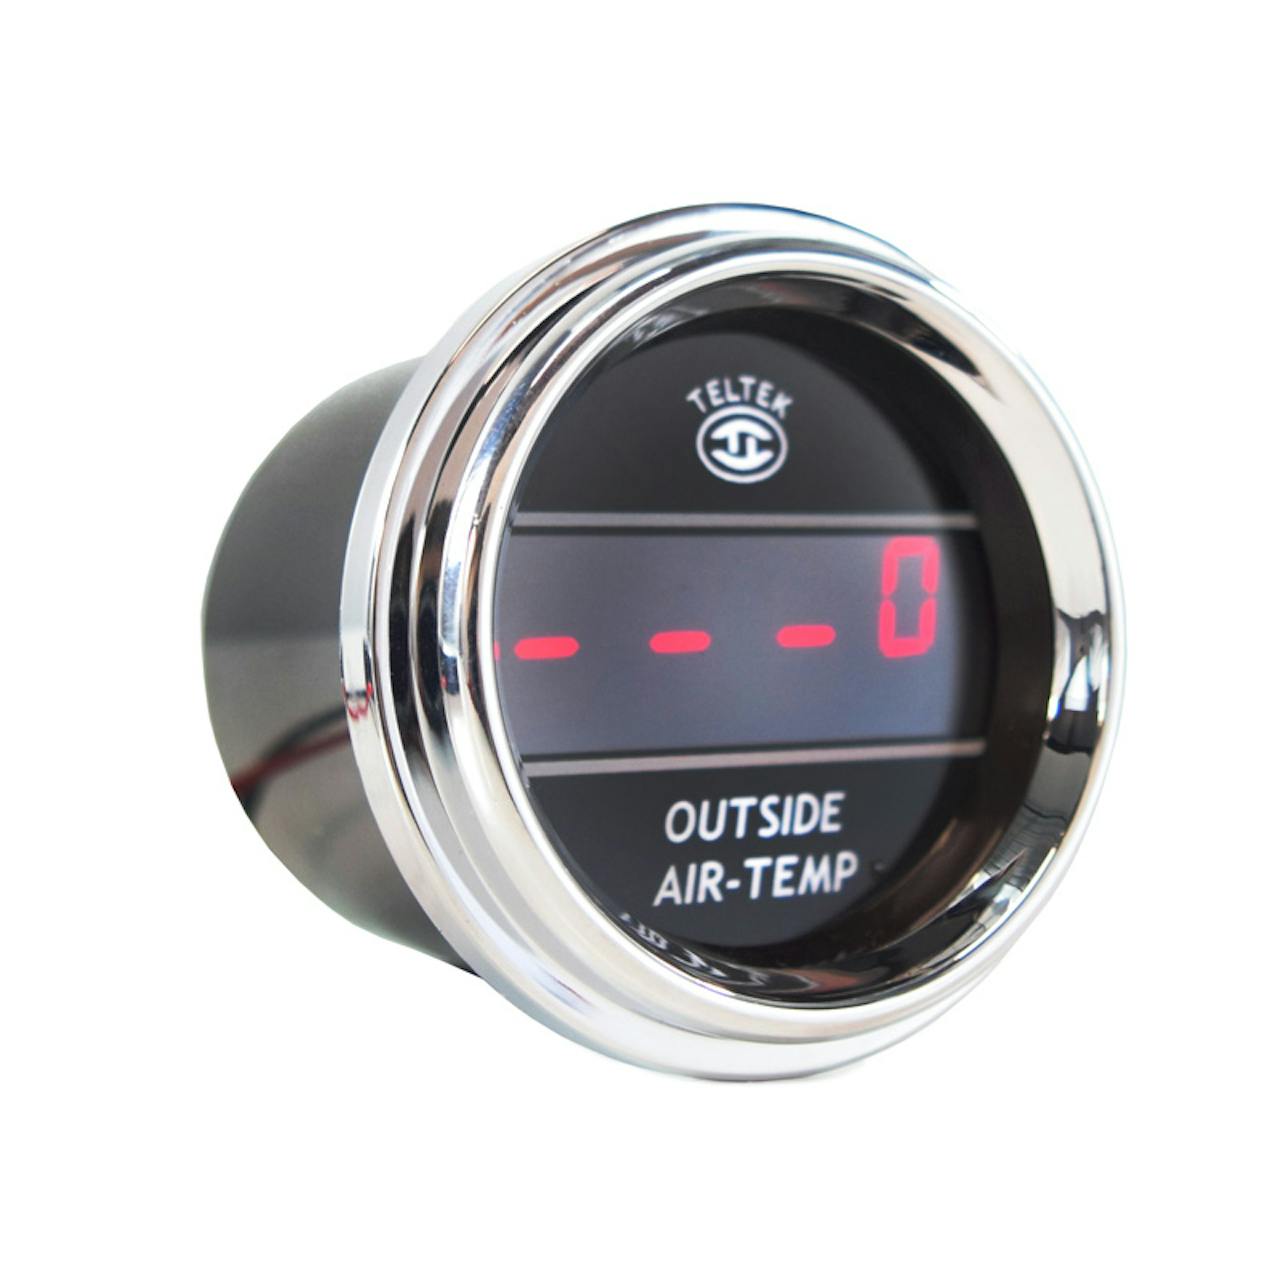 https://raneys-cdn11.imgix.net/images/stencil/original/products/76438/117508/Outside-Air-Temperature-Truck-TELTEK-Gauge-Red-Angle-101__45439.1557408433.jpg?auto=compress,format&w=1280